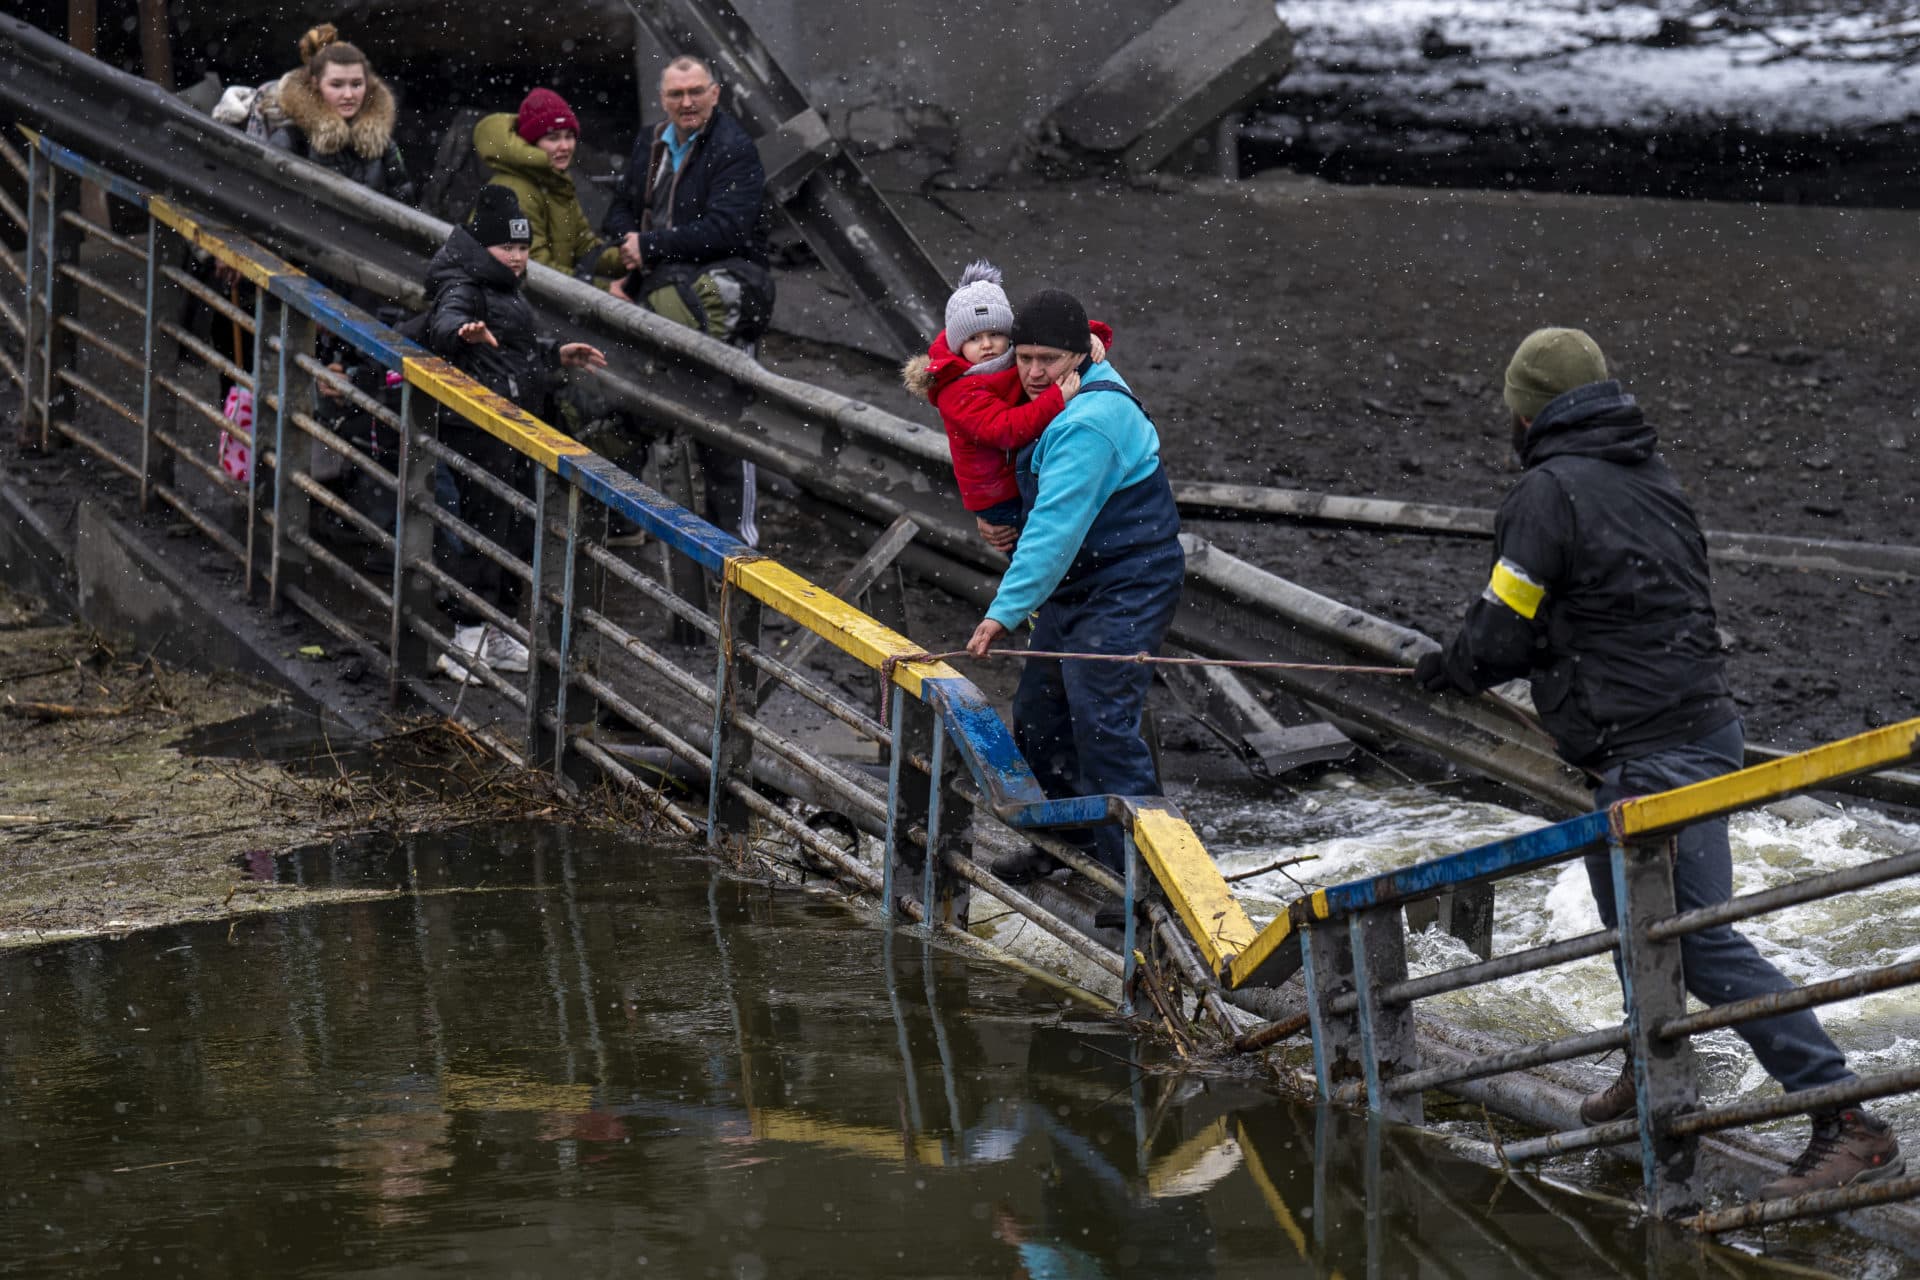 A neighbor carries a child as he helps a fleeing family across a destroyed bridge on the outskirts of Kyiv on Wednesday, March 2. Russian forces have escalated their attacks on crowded cities in what Ukraine's leader called a blatant campaign of terror. (Emilio Morenatti/AP)